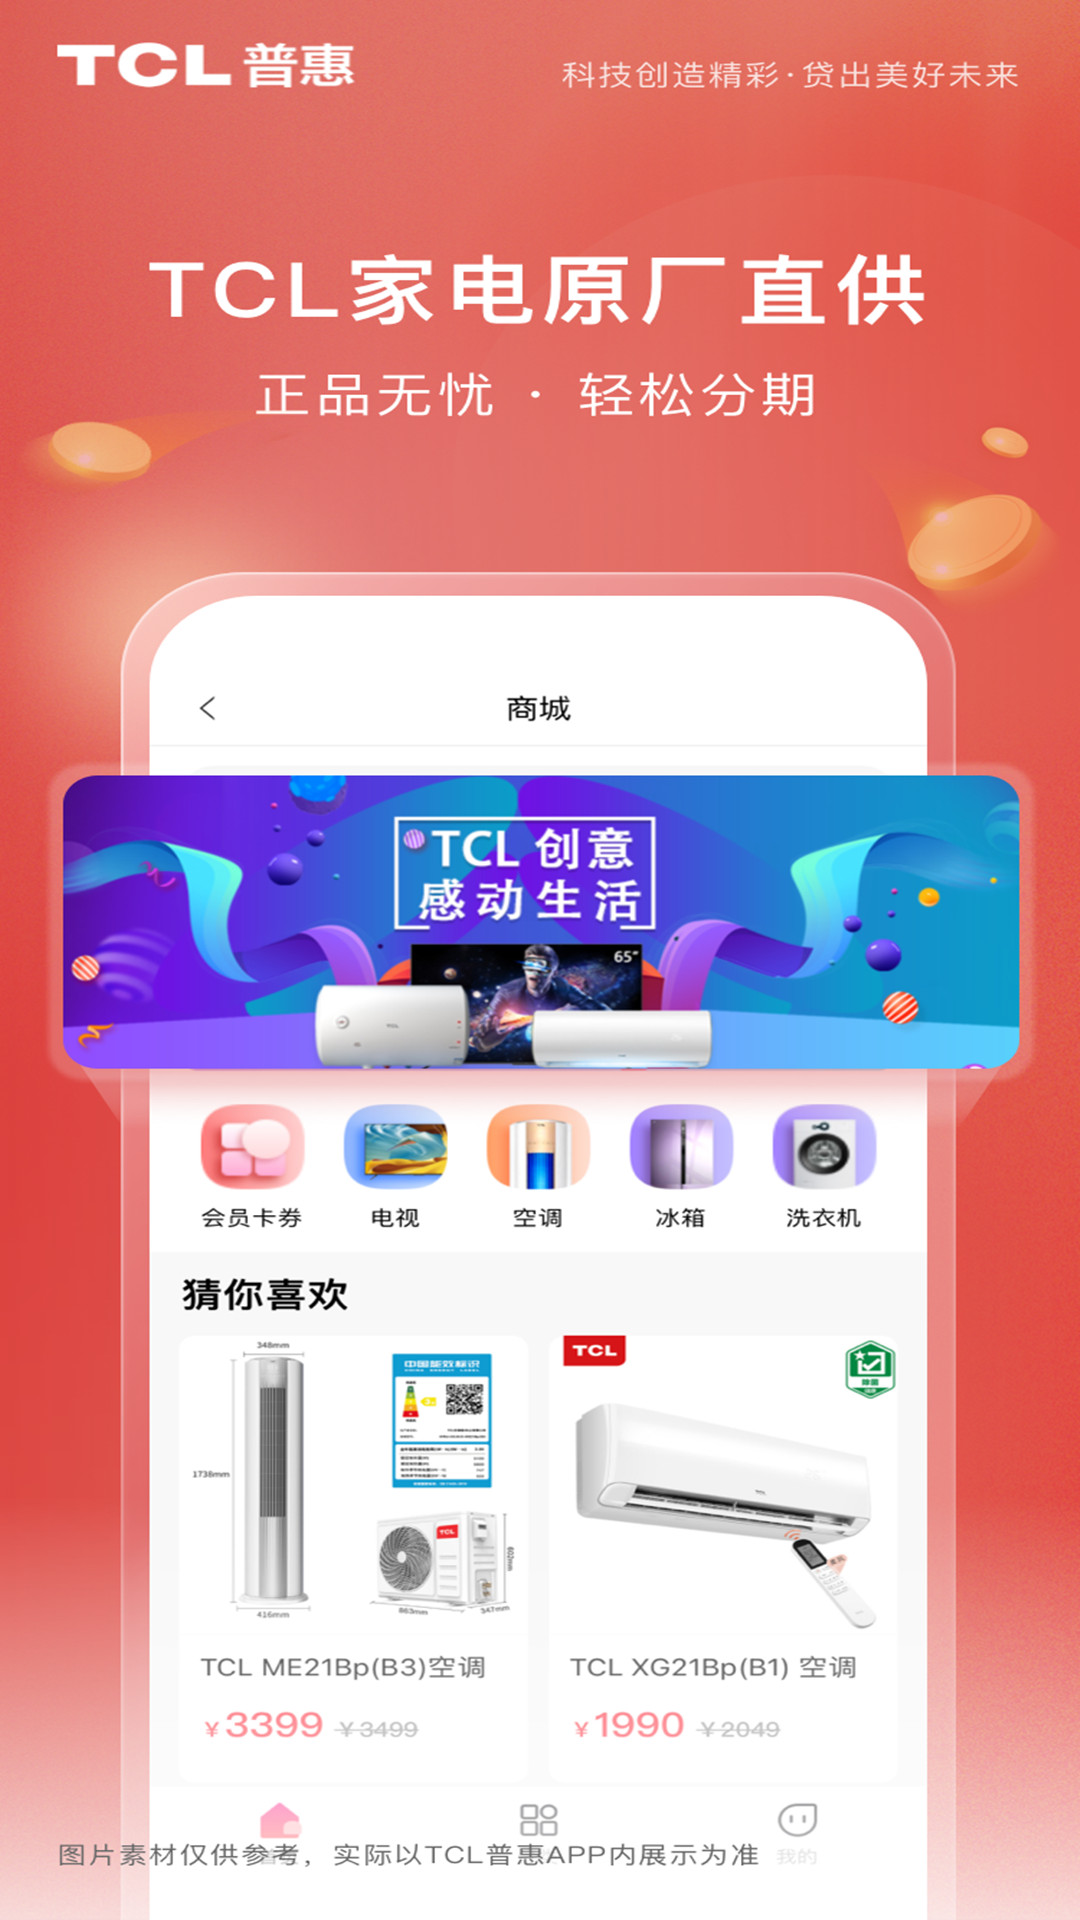 TCL普惠